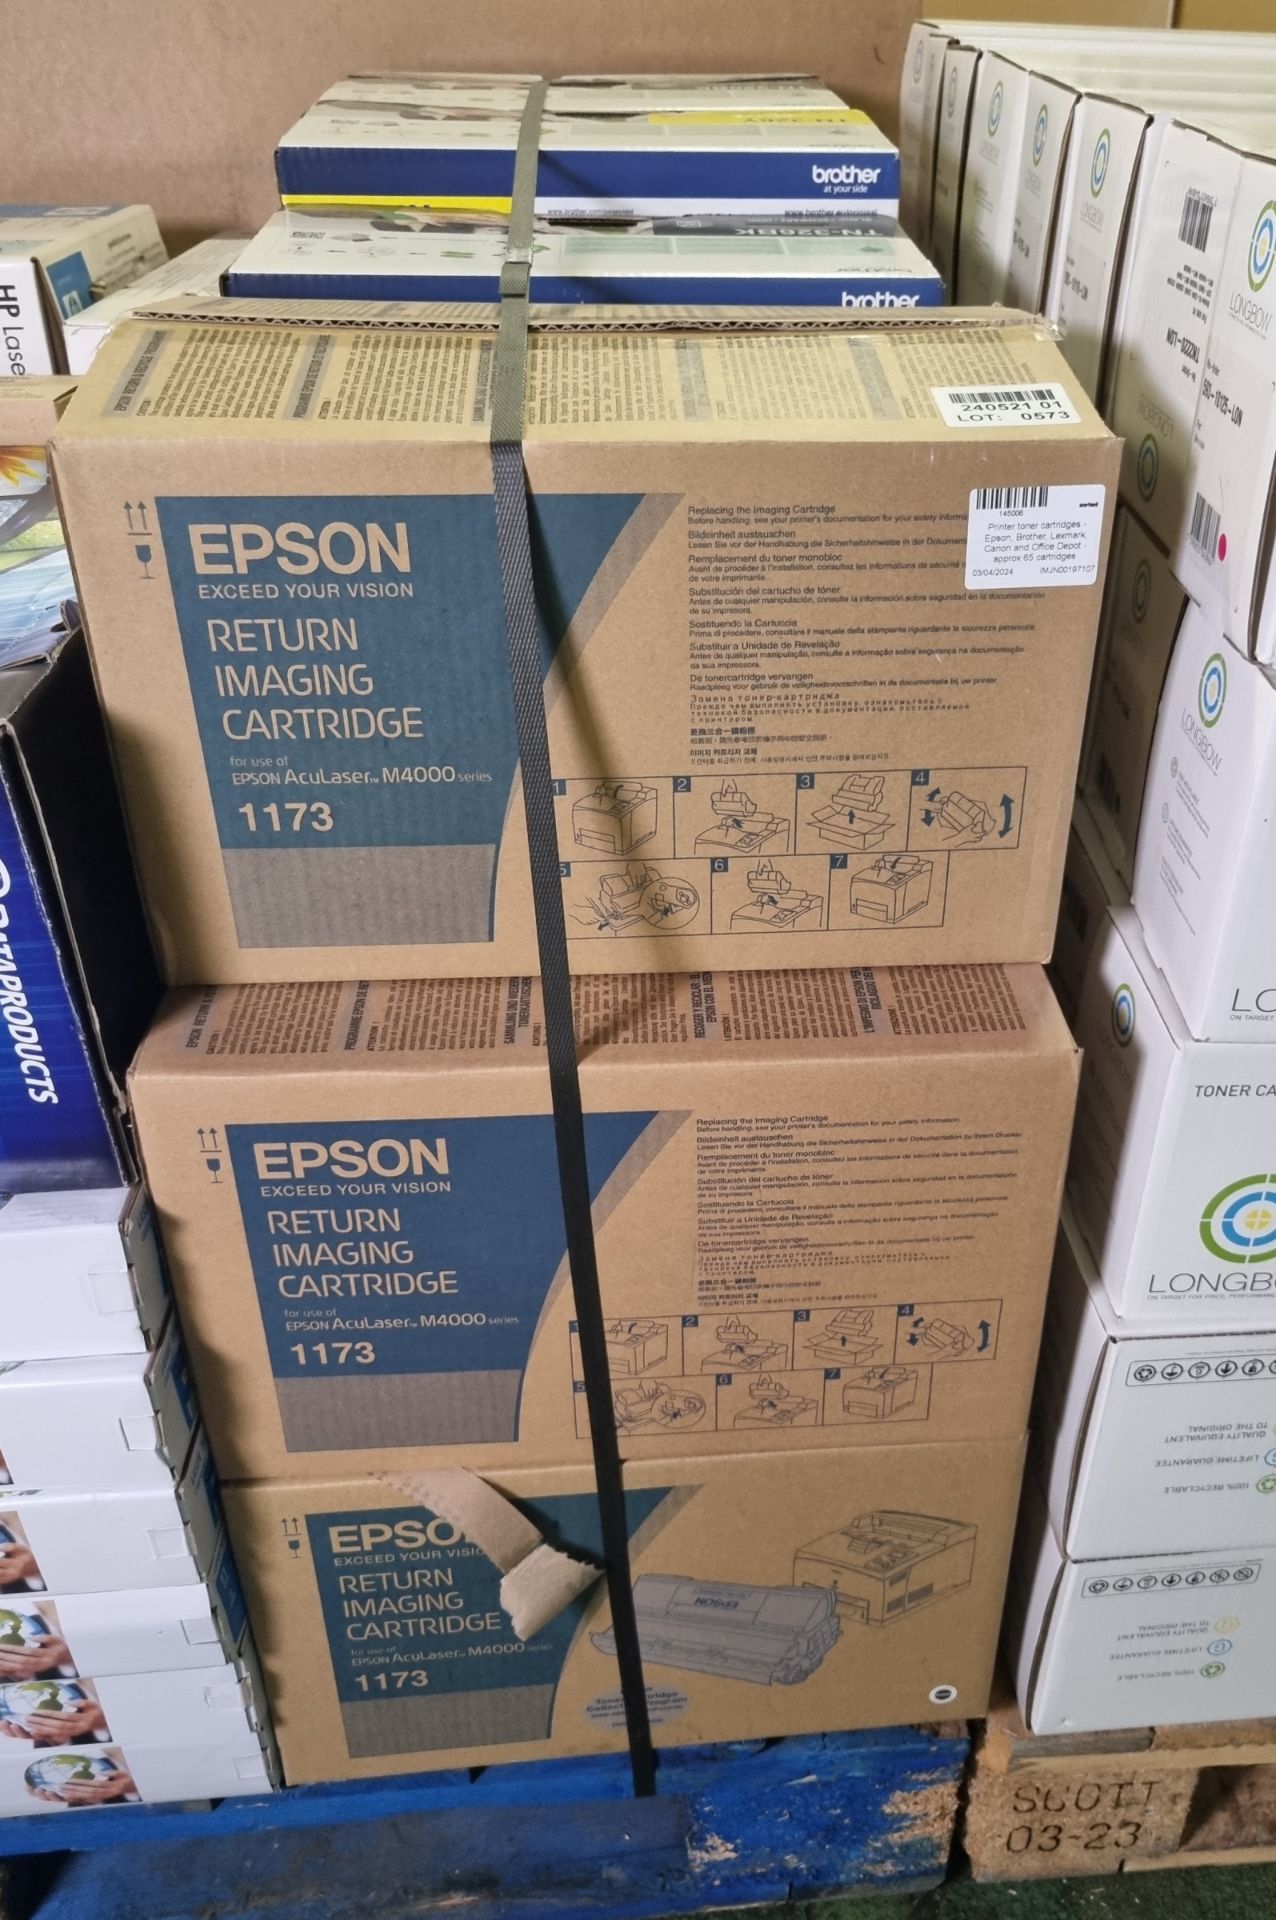 Printer toner cartridges - Epson, Brother, Lexmark, Canon and Office Depot - approx. 65 cartridges - Image 3 of 7